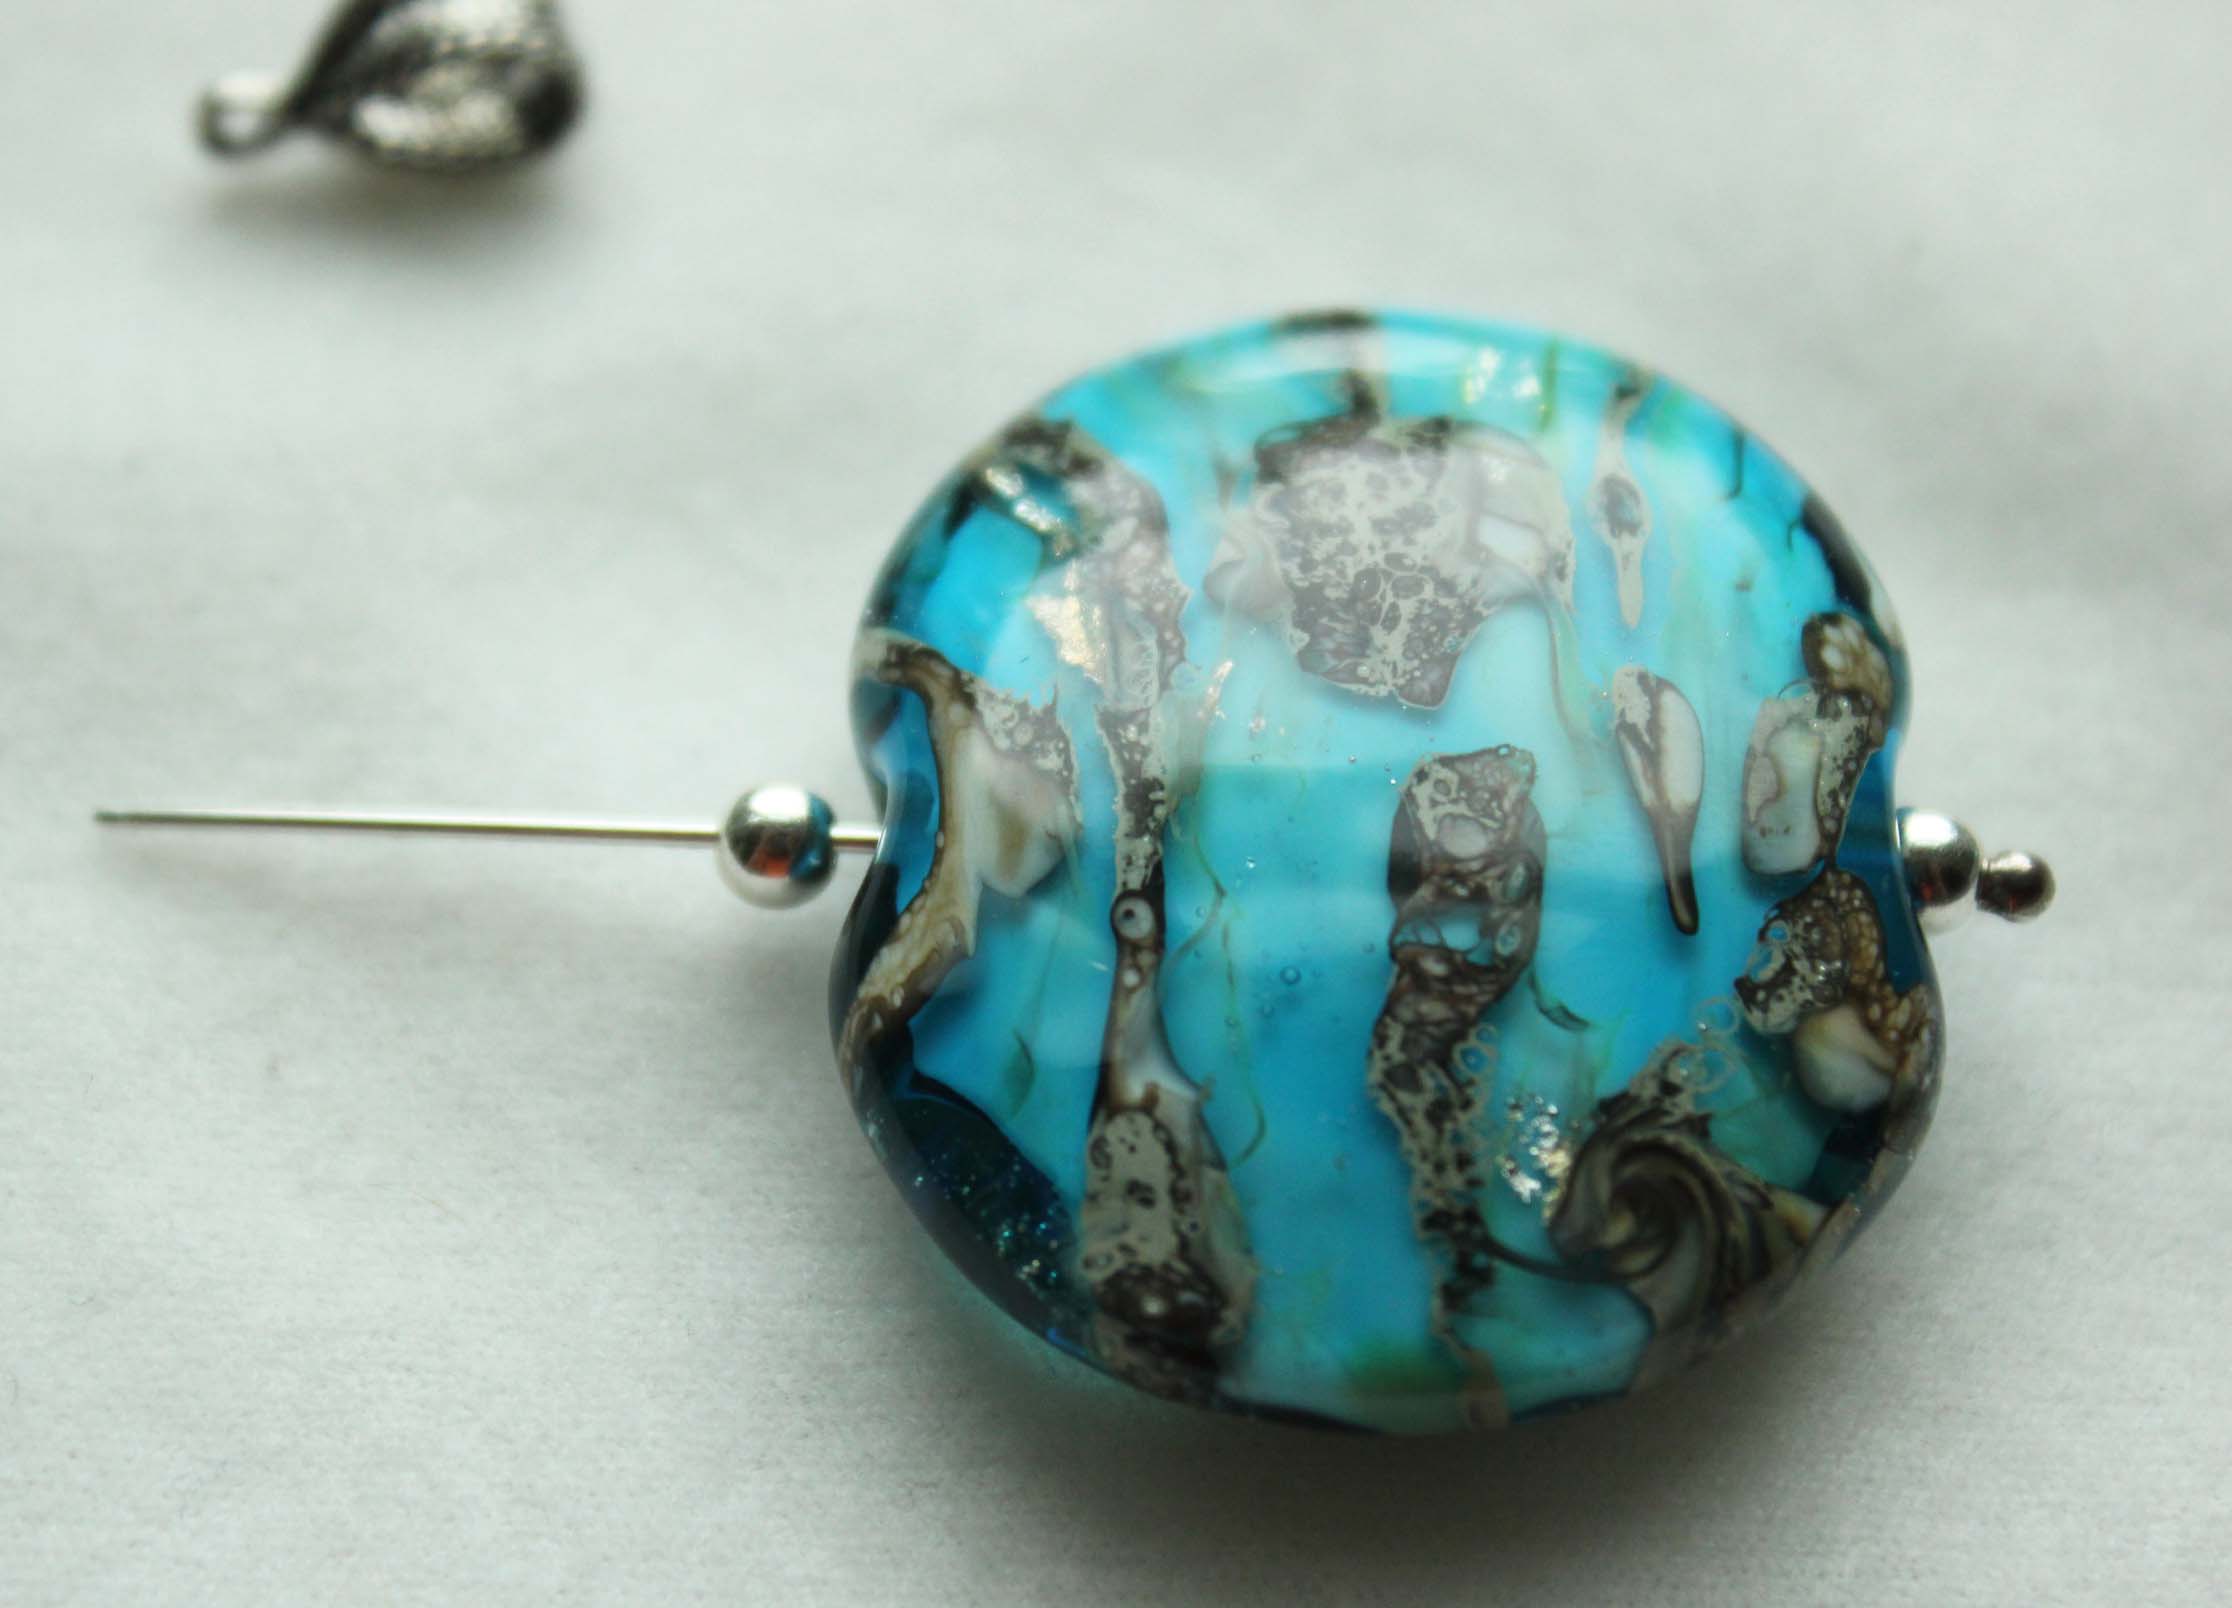 Add the lampwork bead and another silver round to the headpin